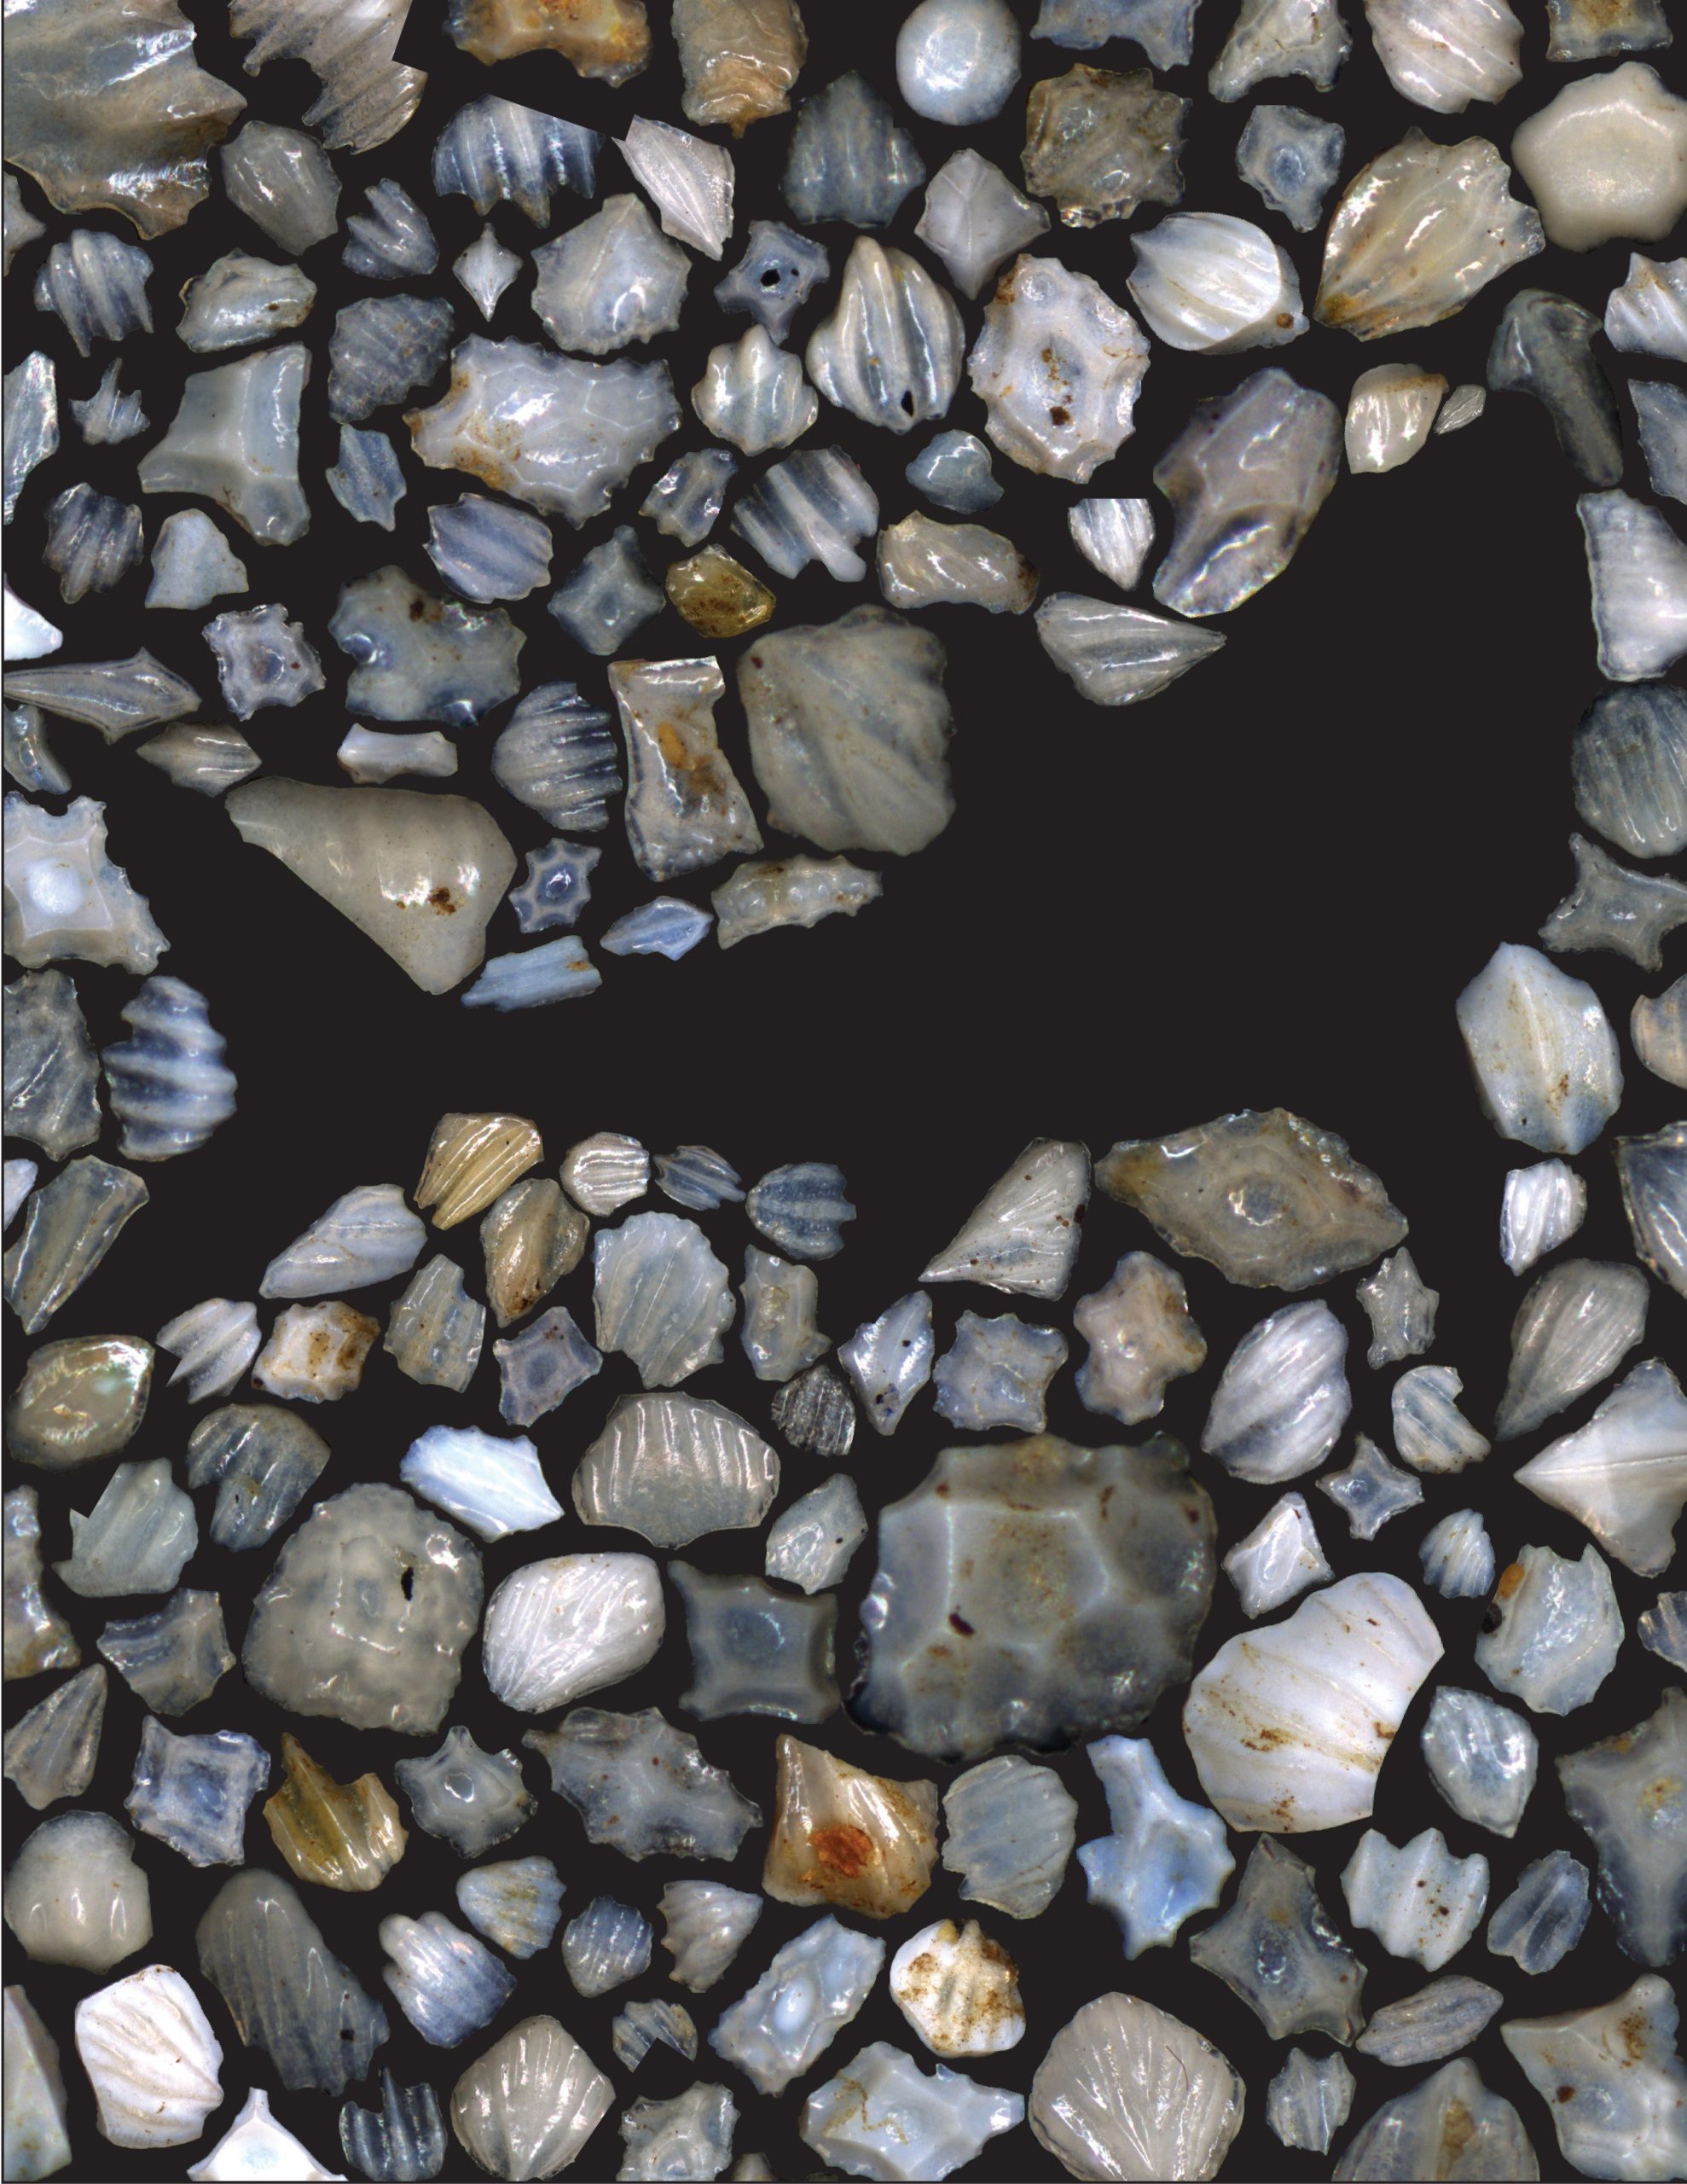 The silhouette of a shark appears amid a cluster of dermal denticles.  (Image: Leah Rubin)